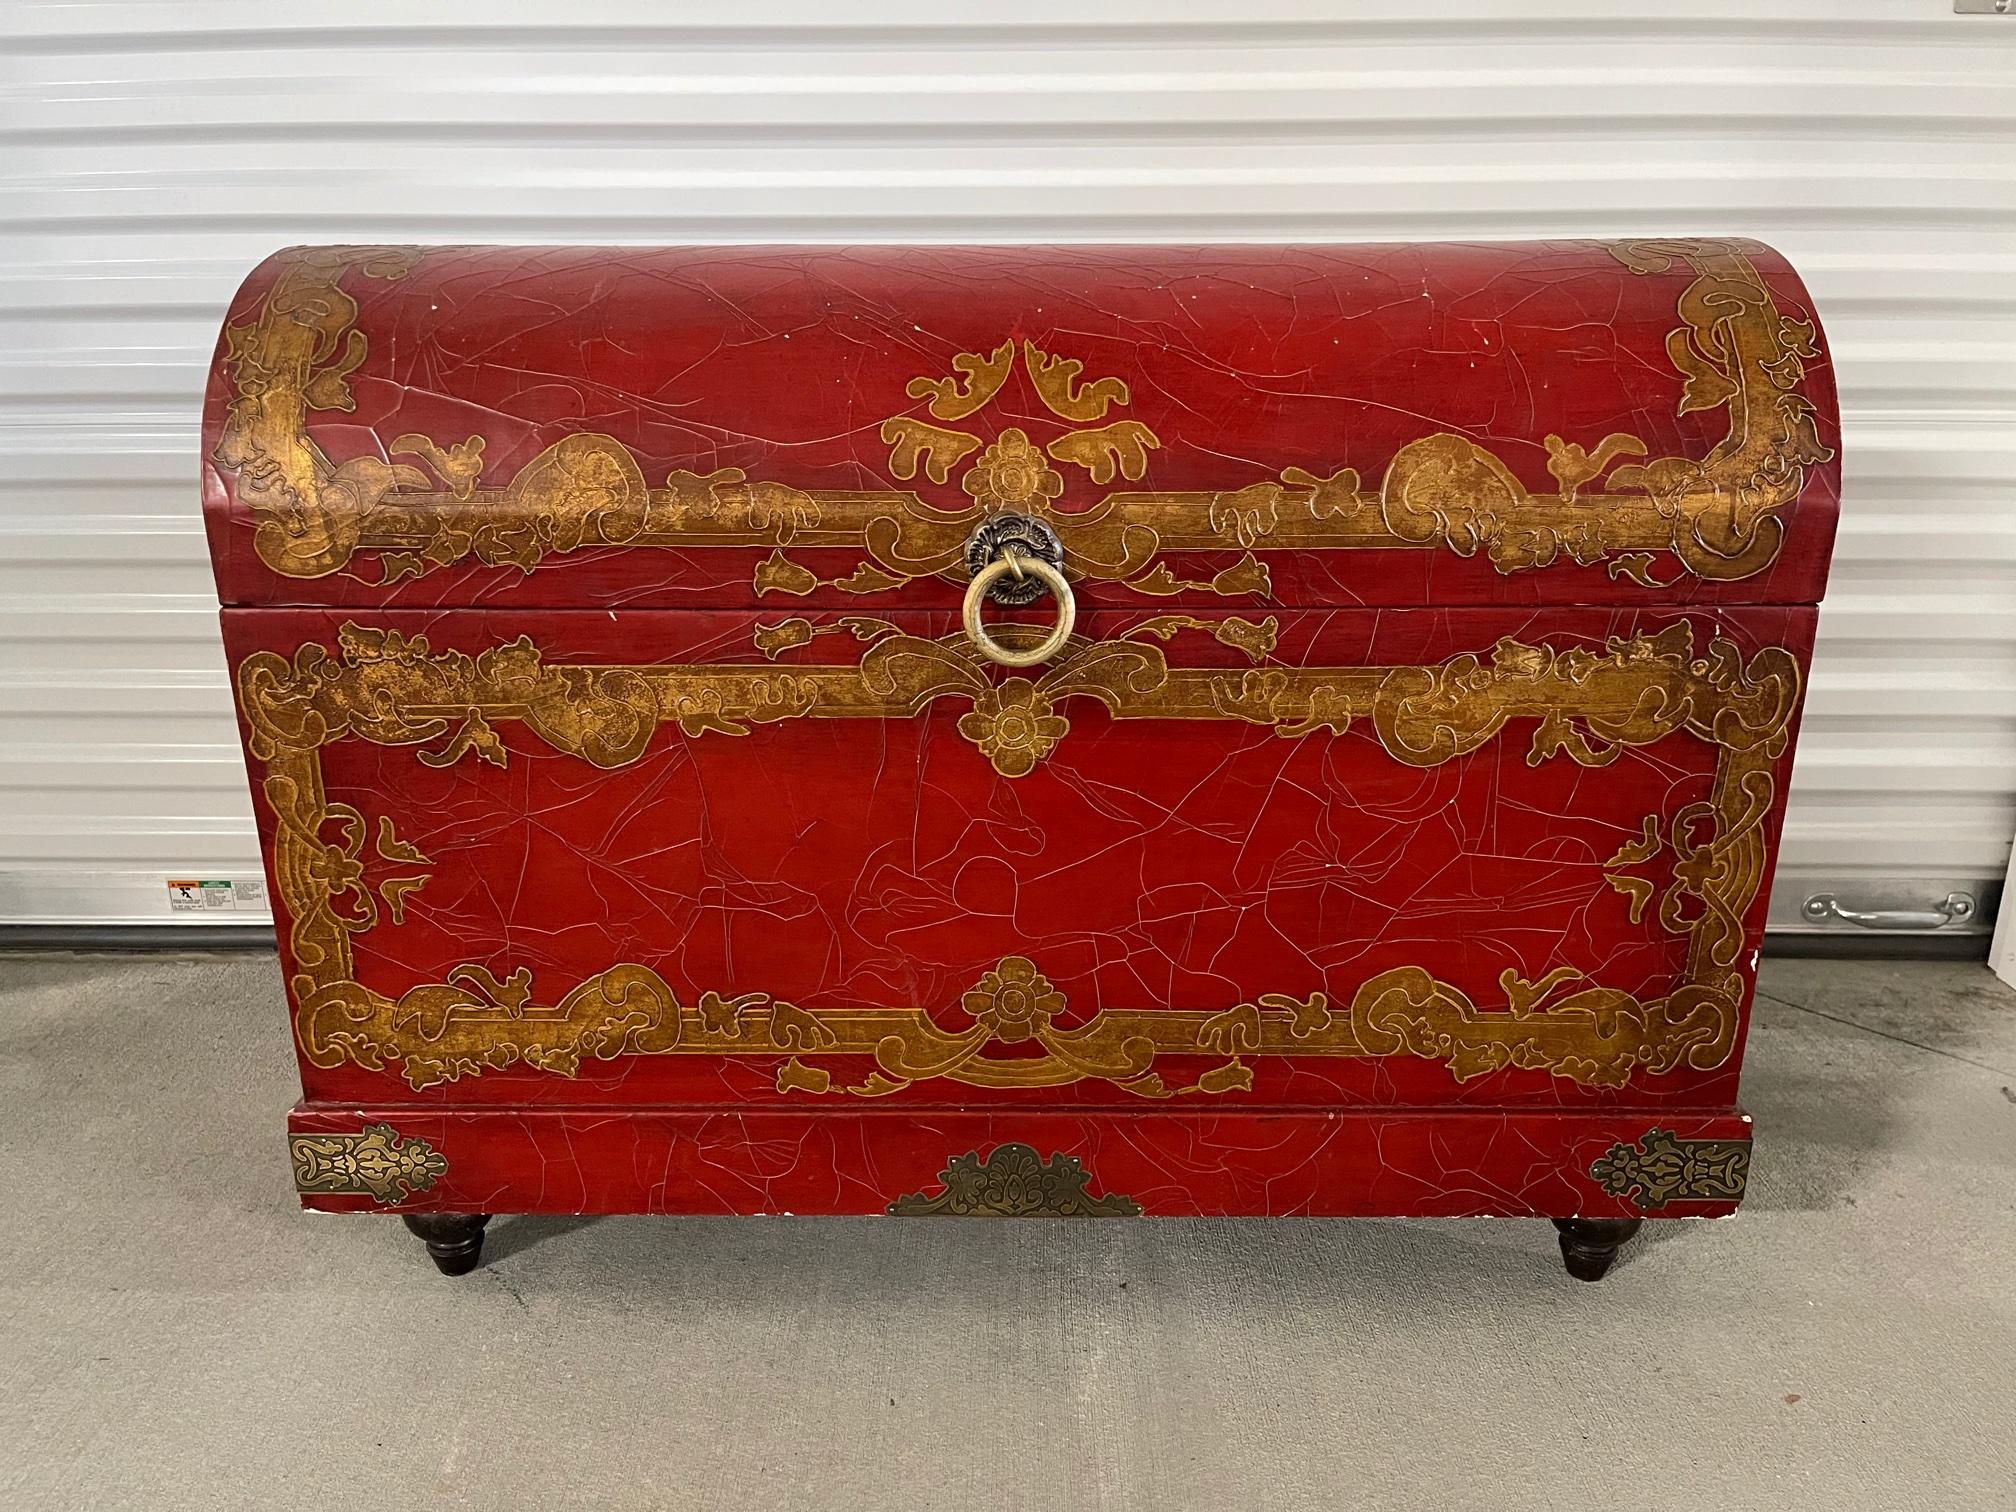 Chinese red lacquer and gold detailing dome top trunk on feet, 20th century.